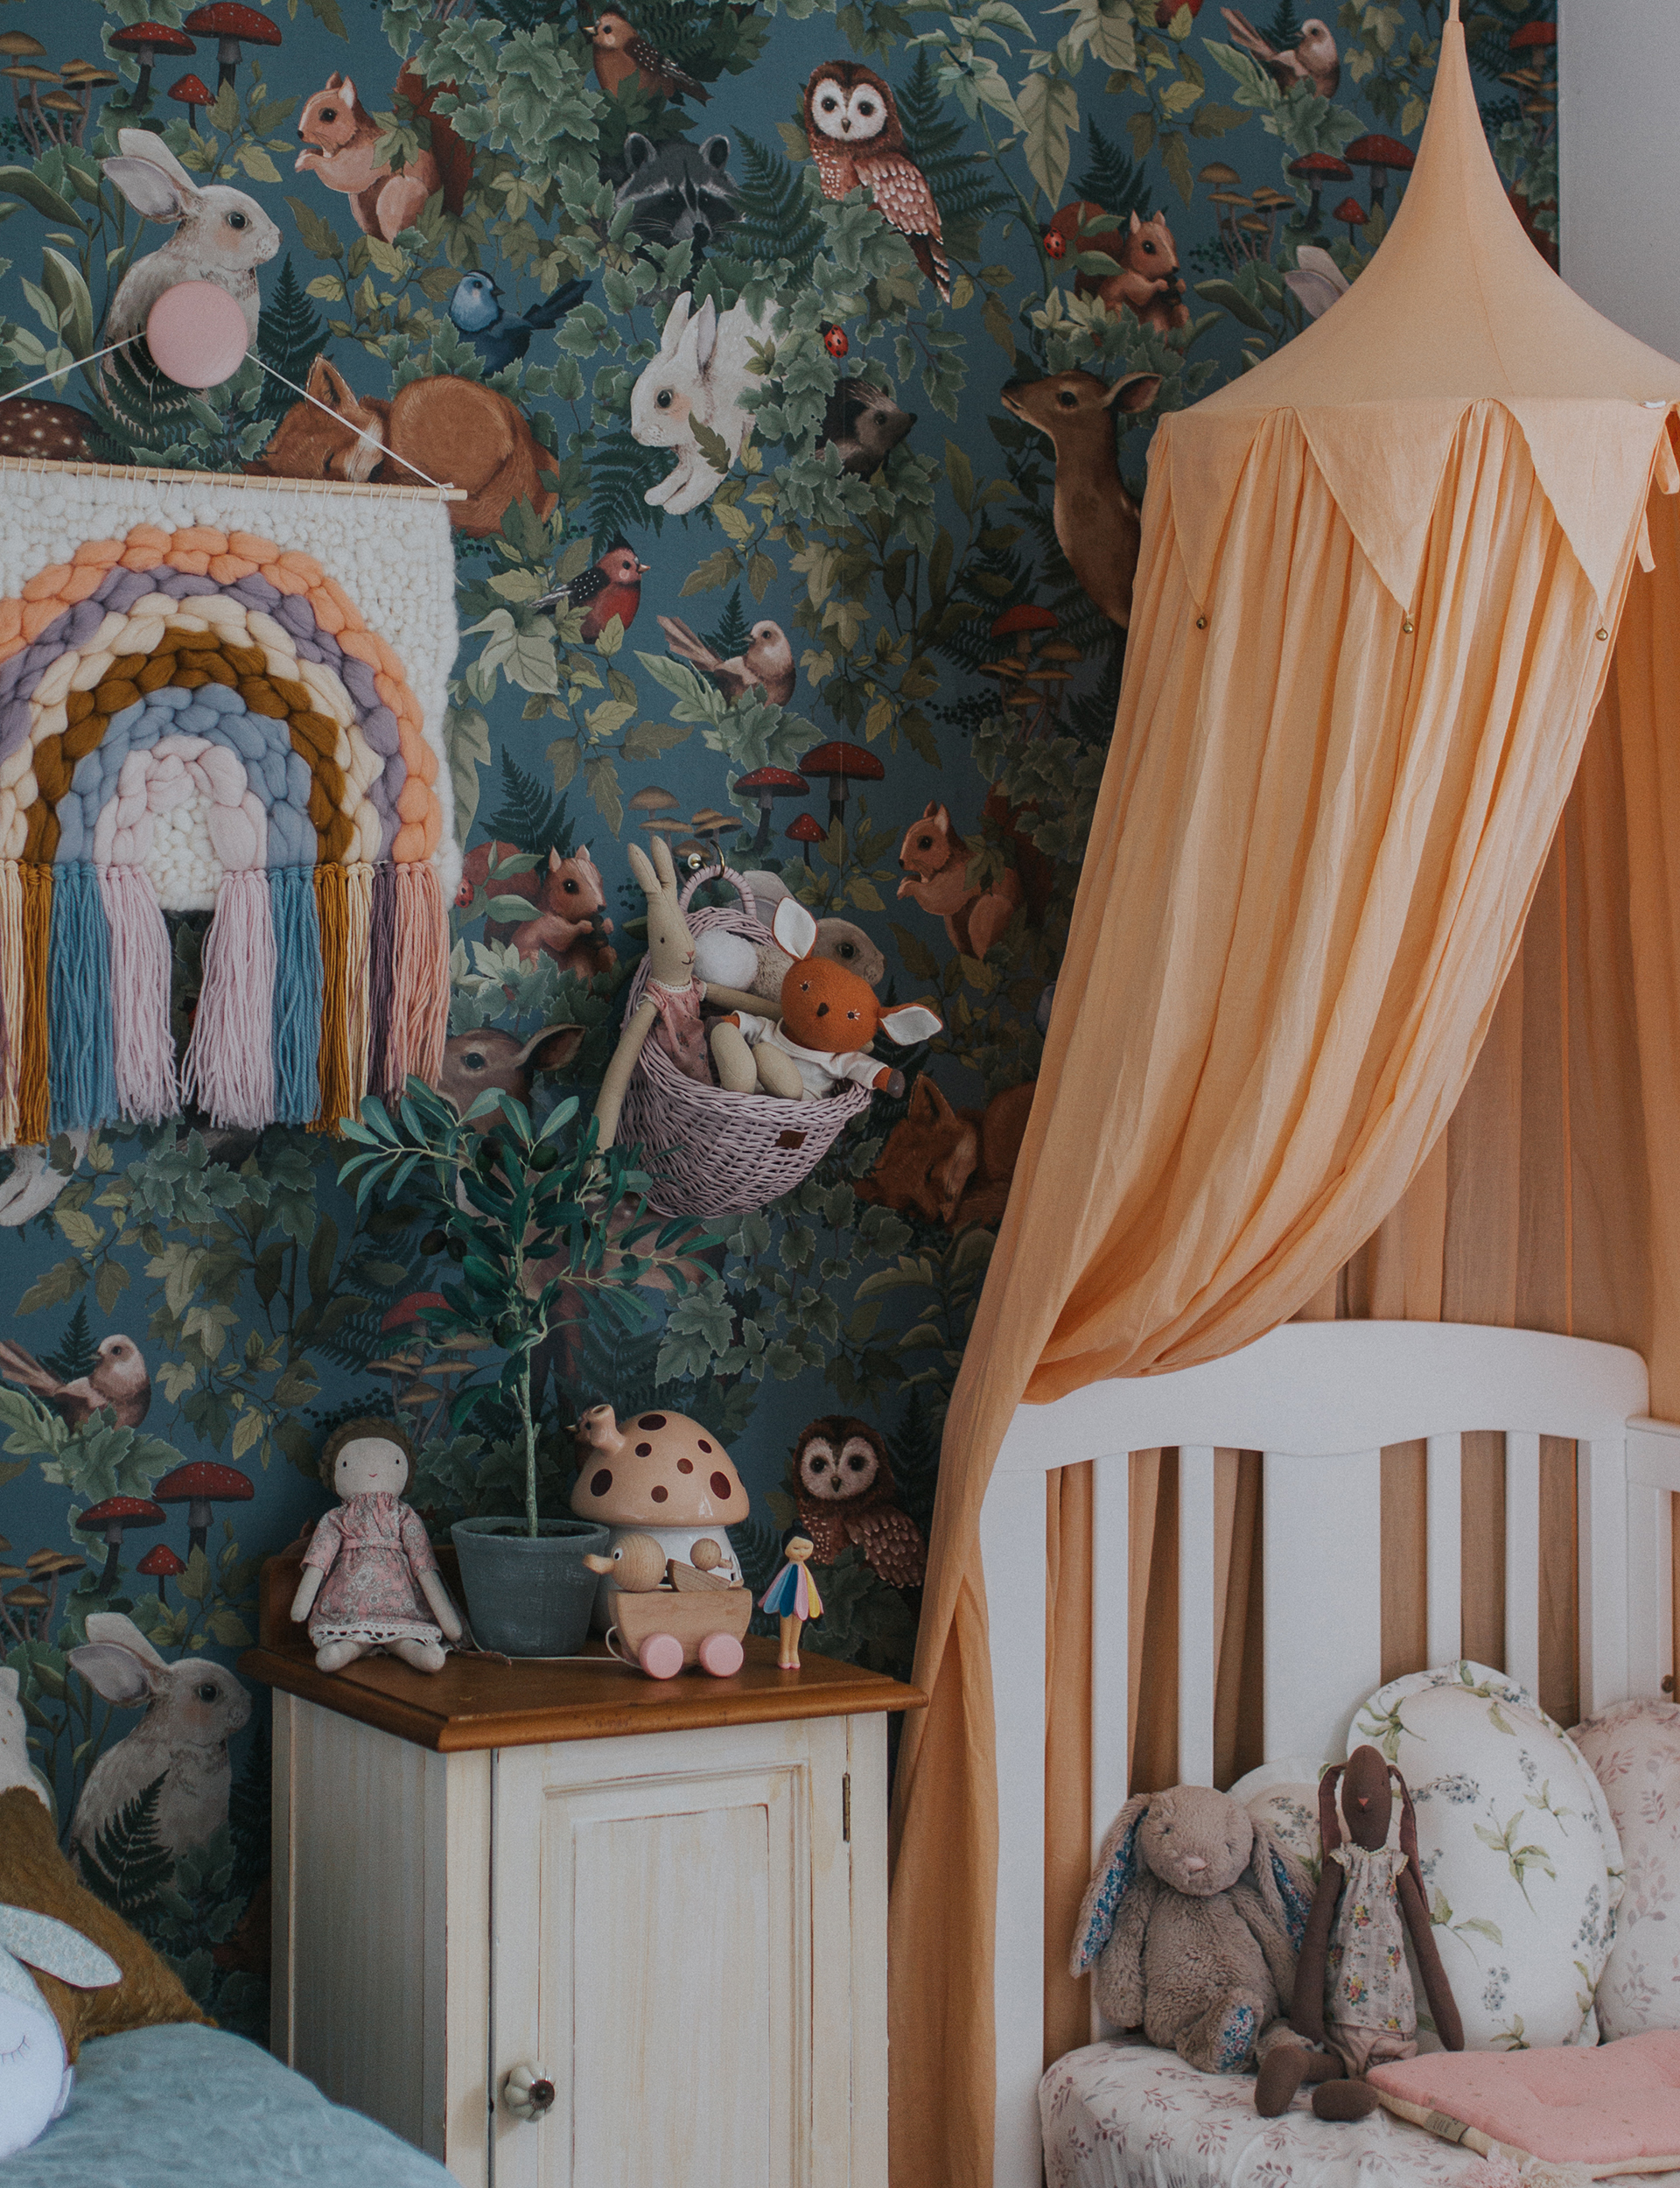 Kiwi Instagrammers to follow interior inspo Clever Poppy